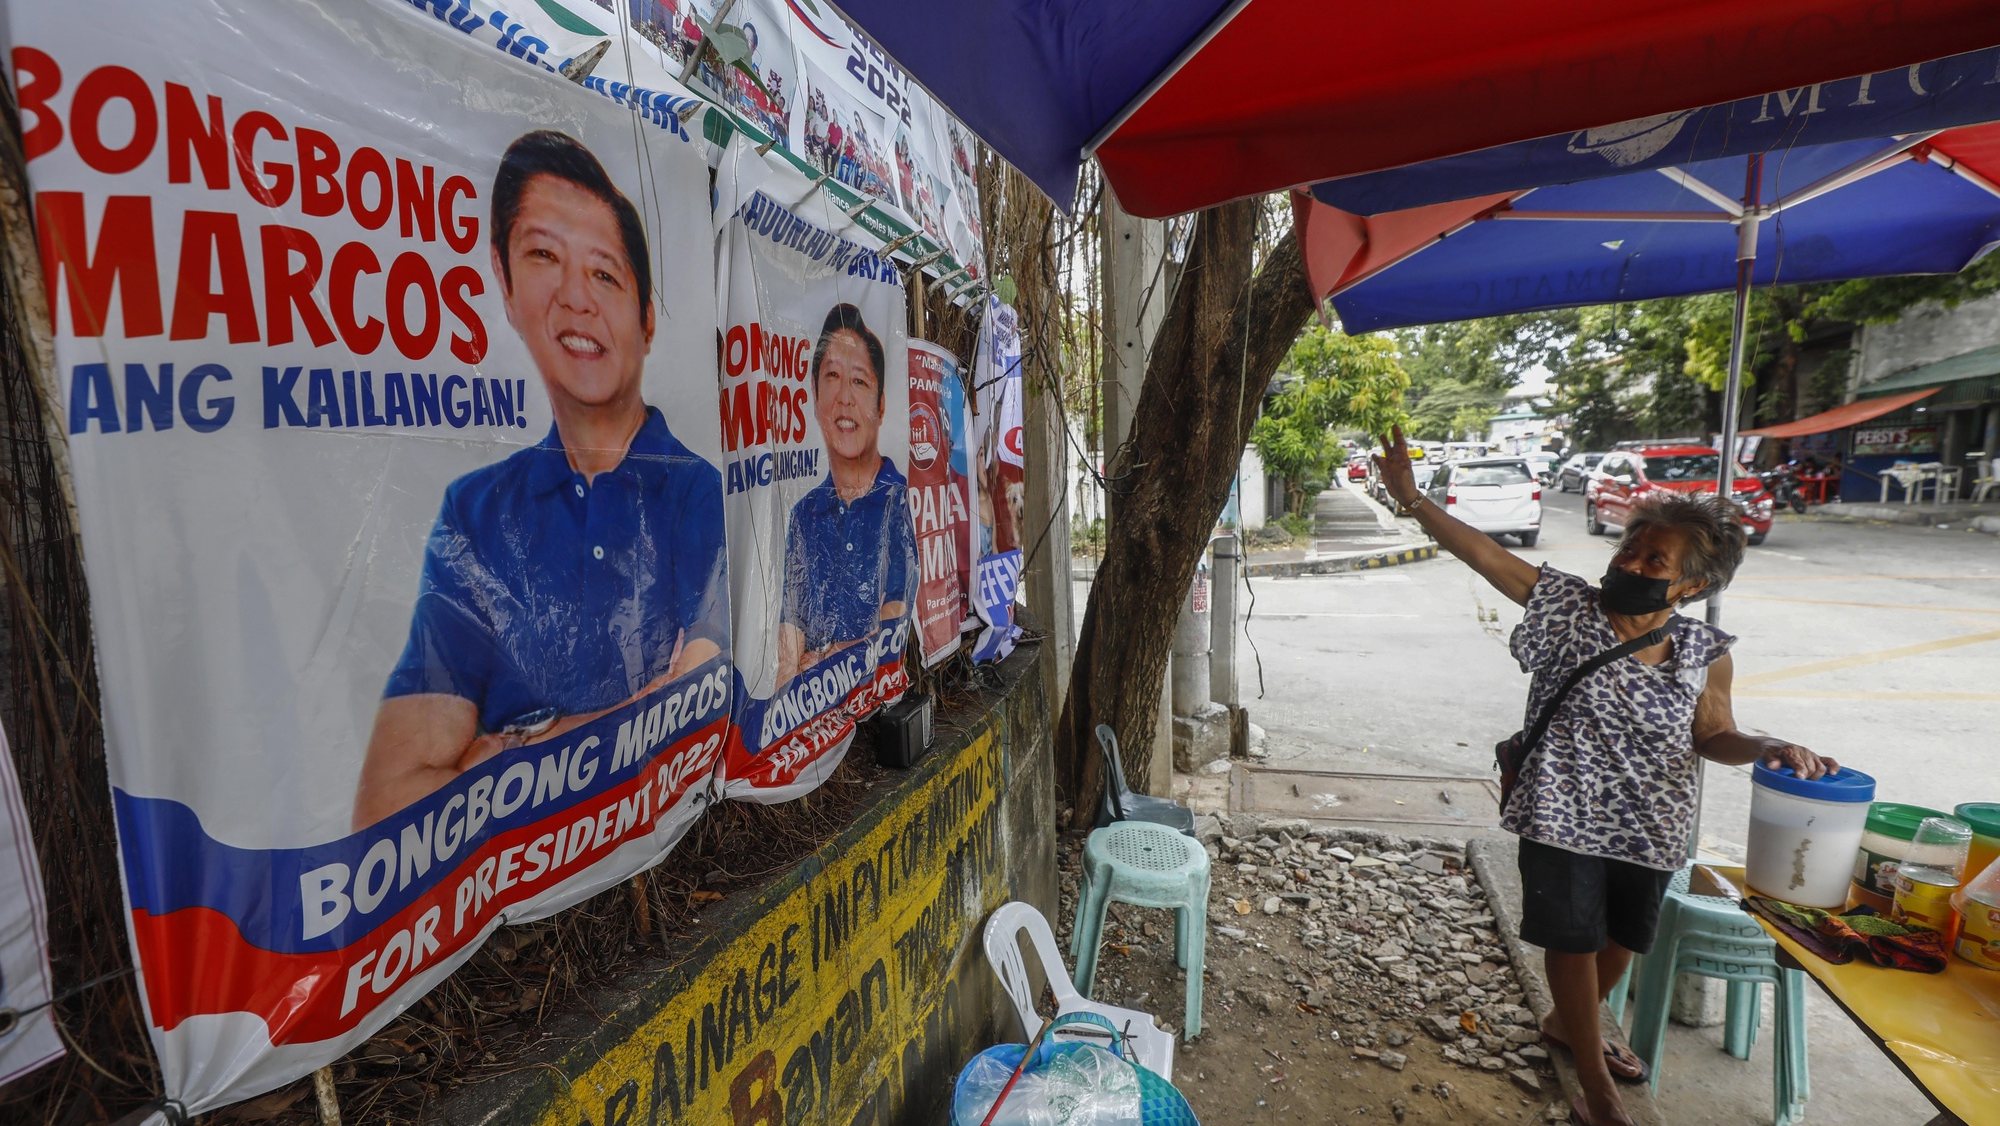 epa09873156 A sidewalk vendor of refreshments points to campaign posters of presidential candidate Ferdinand &#039;Bongbong&#039; Marcos Jr., son of the late president Ferdinand Marcos, in Quezon City, Metro Manila, Philippines 31 March 2022 (issued 06 April 2022). Activists have voiced concern over the possible return of &#039;a powerful dynasty&#039; to the head of state and Martial Law era human rights abuses as Ferdinand &#039;Bongbong&#039; Marcos Jr., son of the late dictator Ferdinand Marcos, lead the polls in the run for the presidency in the 09 May 2022 elections. According to Amnesty International, 3,257 people were made victims of extrajudicial killings and 35,000 were tortured during the Martial Law years from 1972 to 1986. The Philippine presidential and vice-presidential elections are scheduled to be held on 09 May 2022.  EPA/ROLEX DELA PENA  ATTENTION: This Image is part of a PHOTO SET